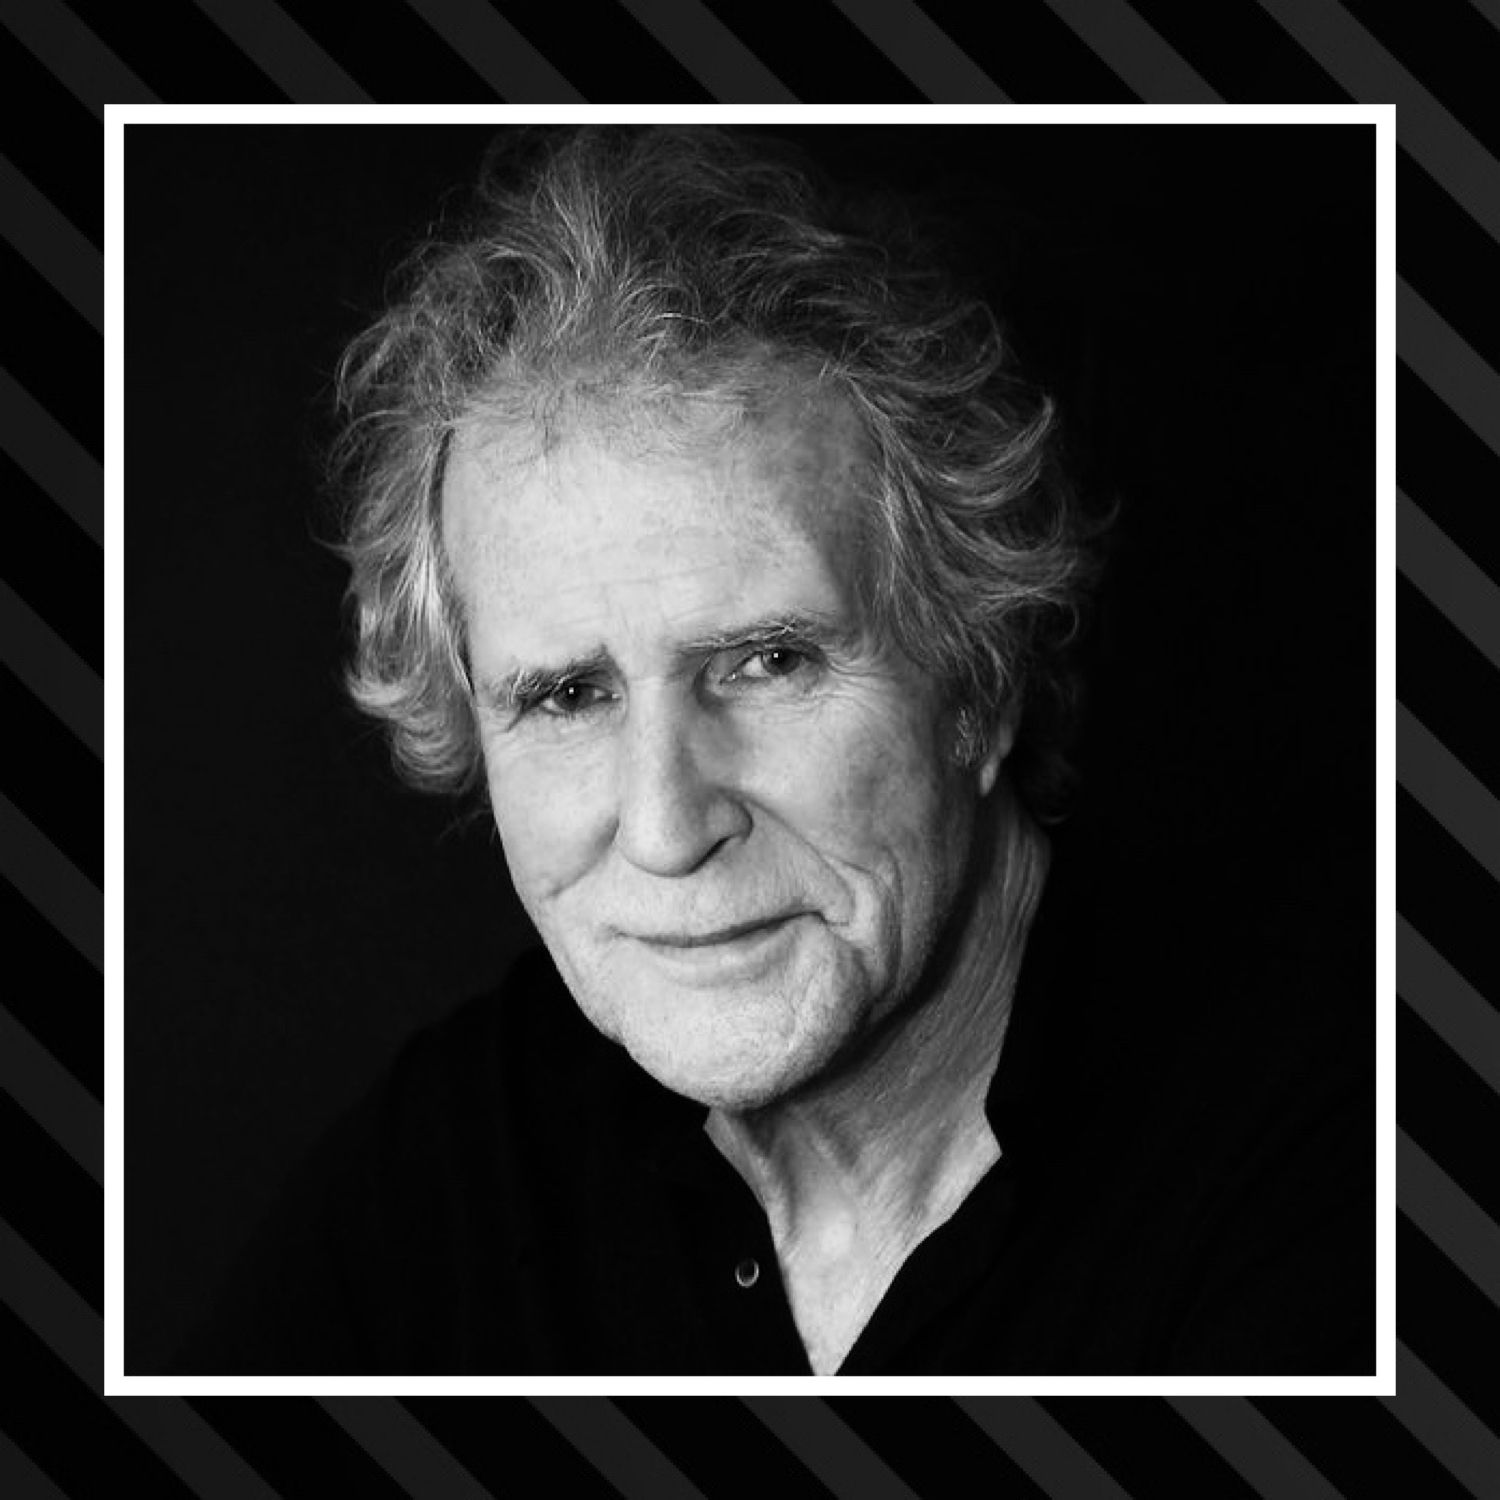 59: The one with Dire Straits' John Illsley Image